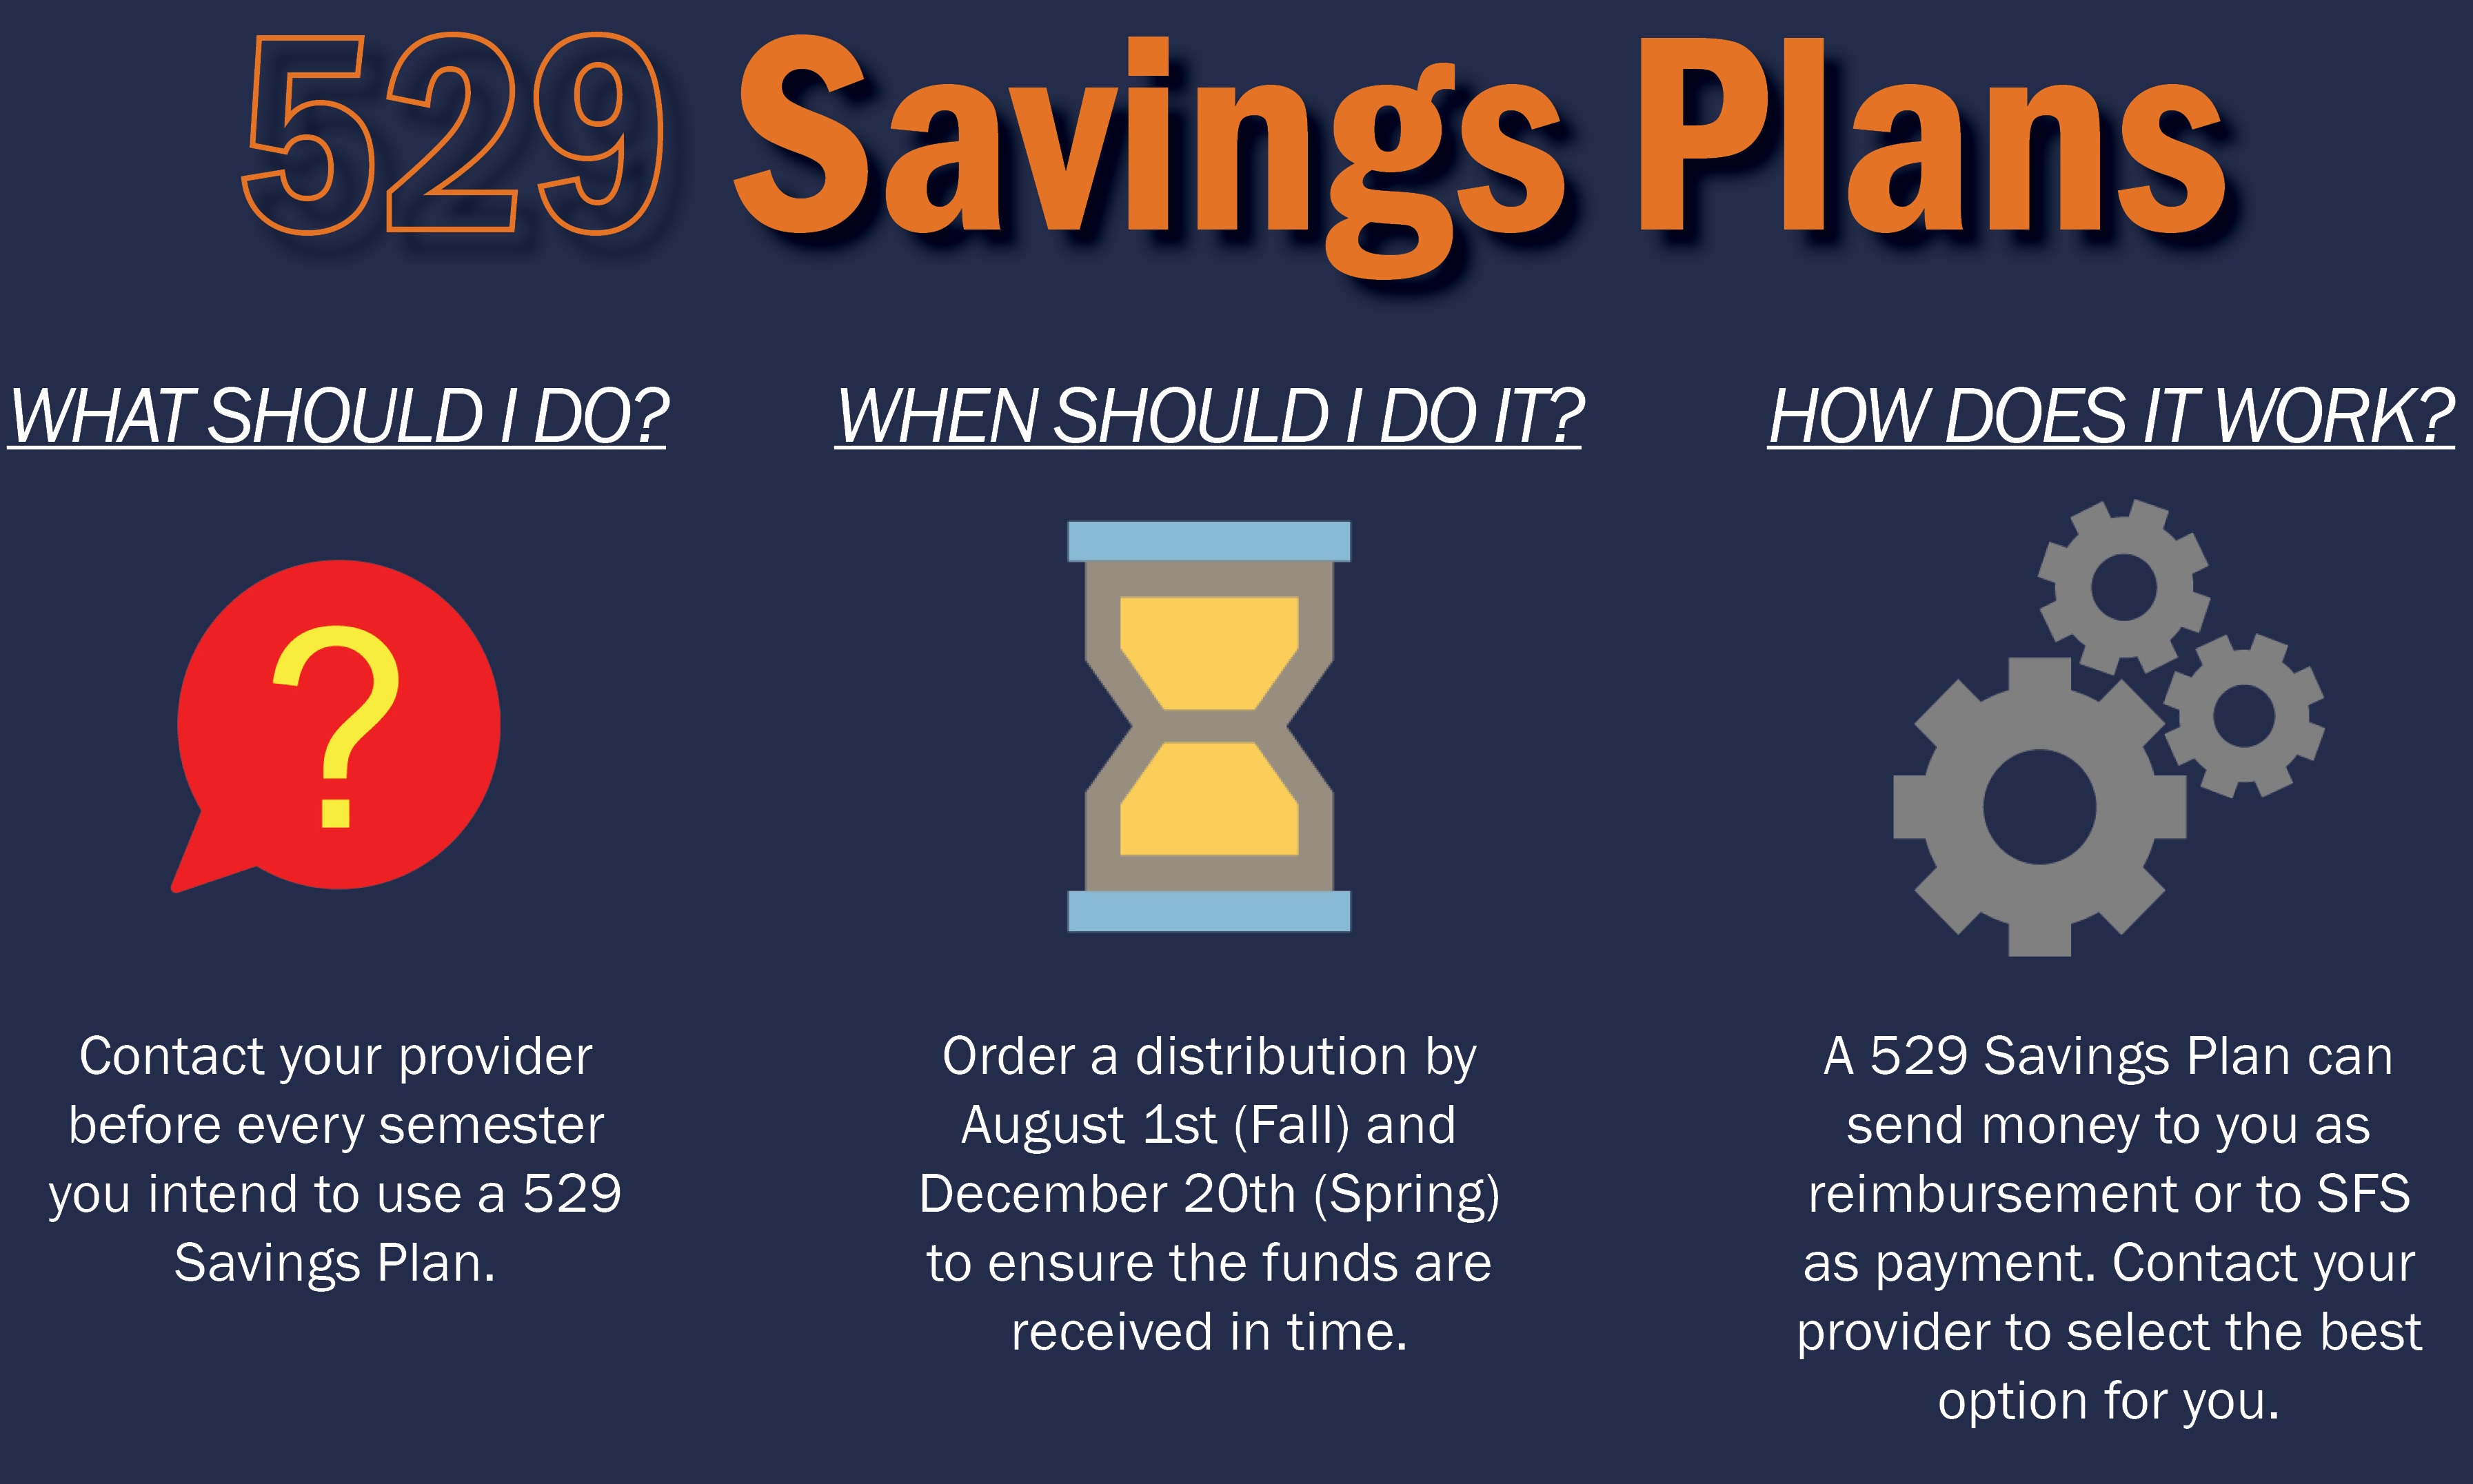 An infographic explains the basic steps of how to redeem a 529 Savings Plan.